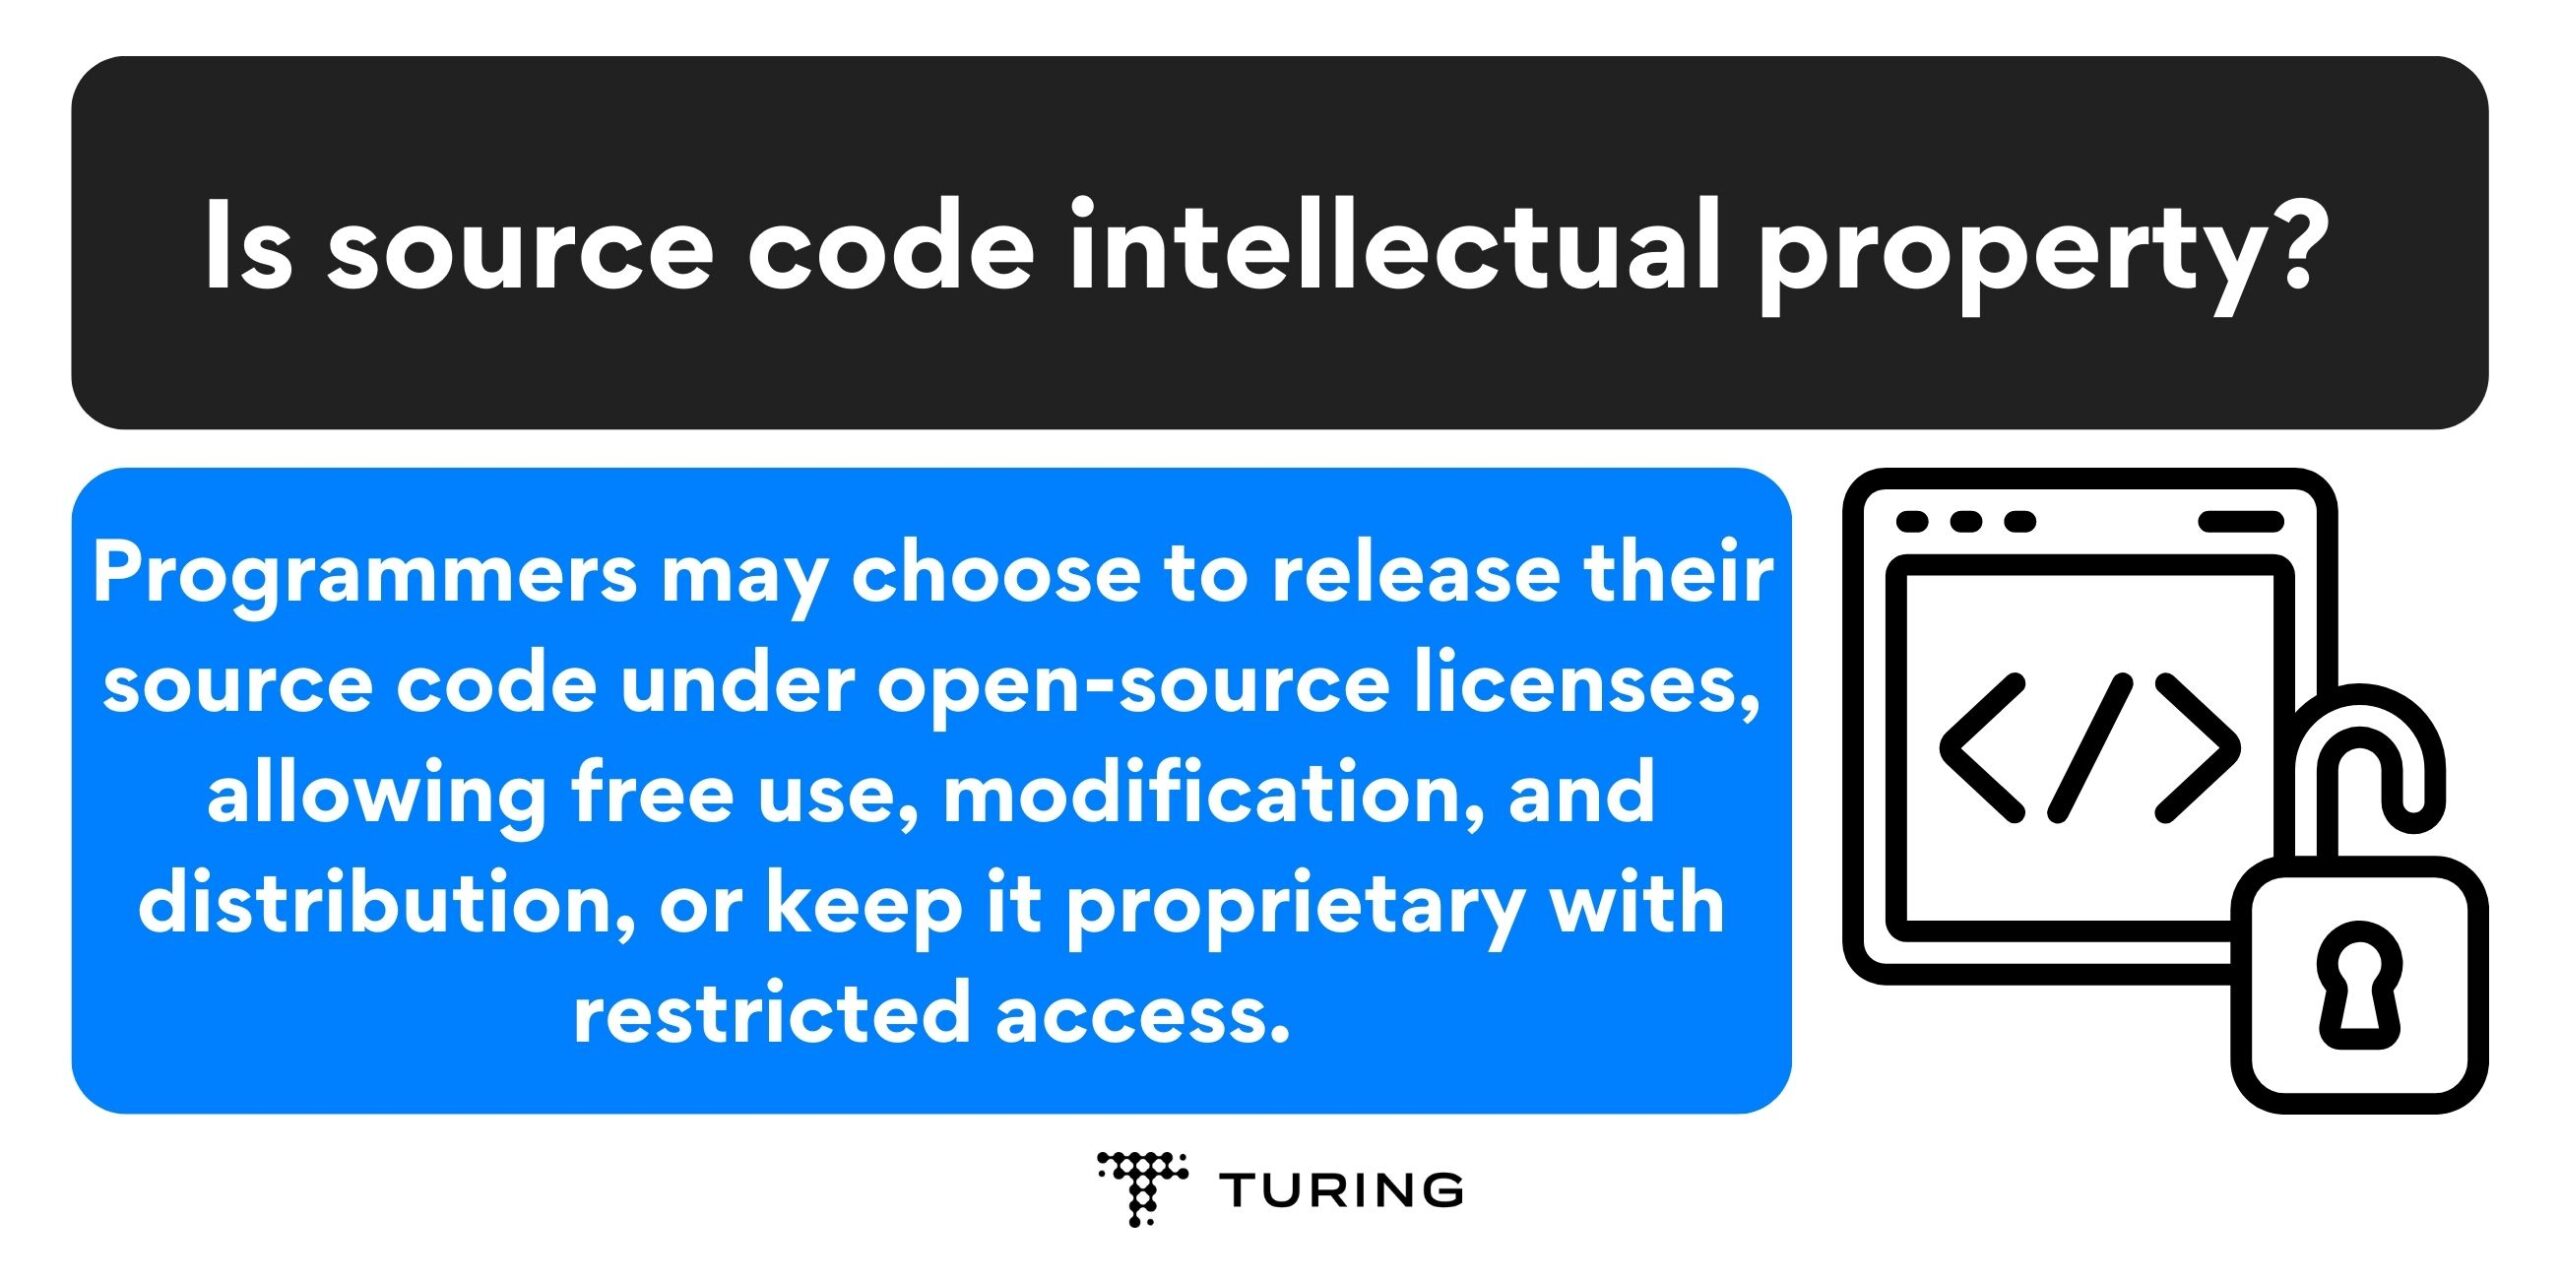 Is source code intellectual property?